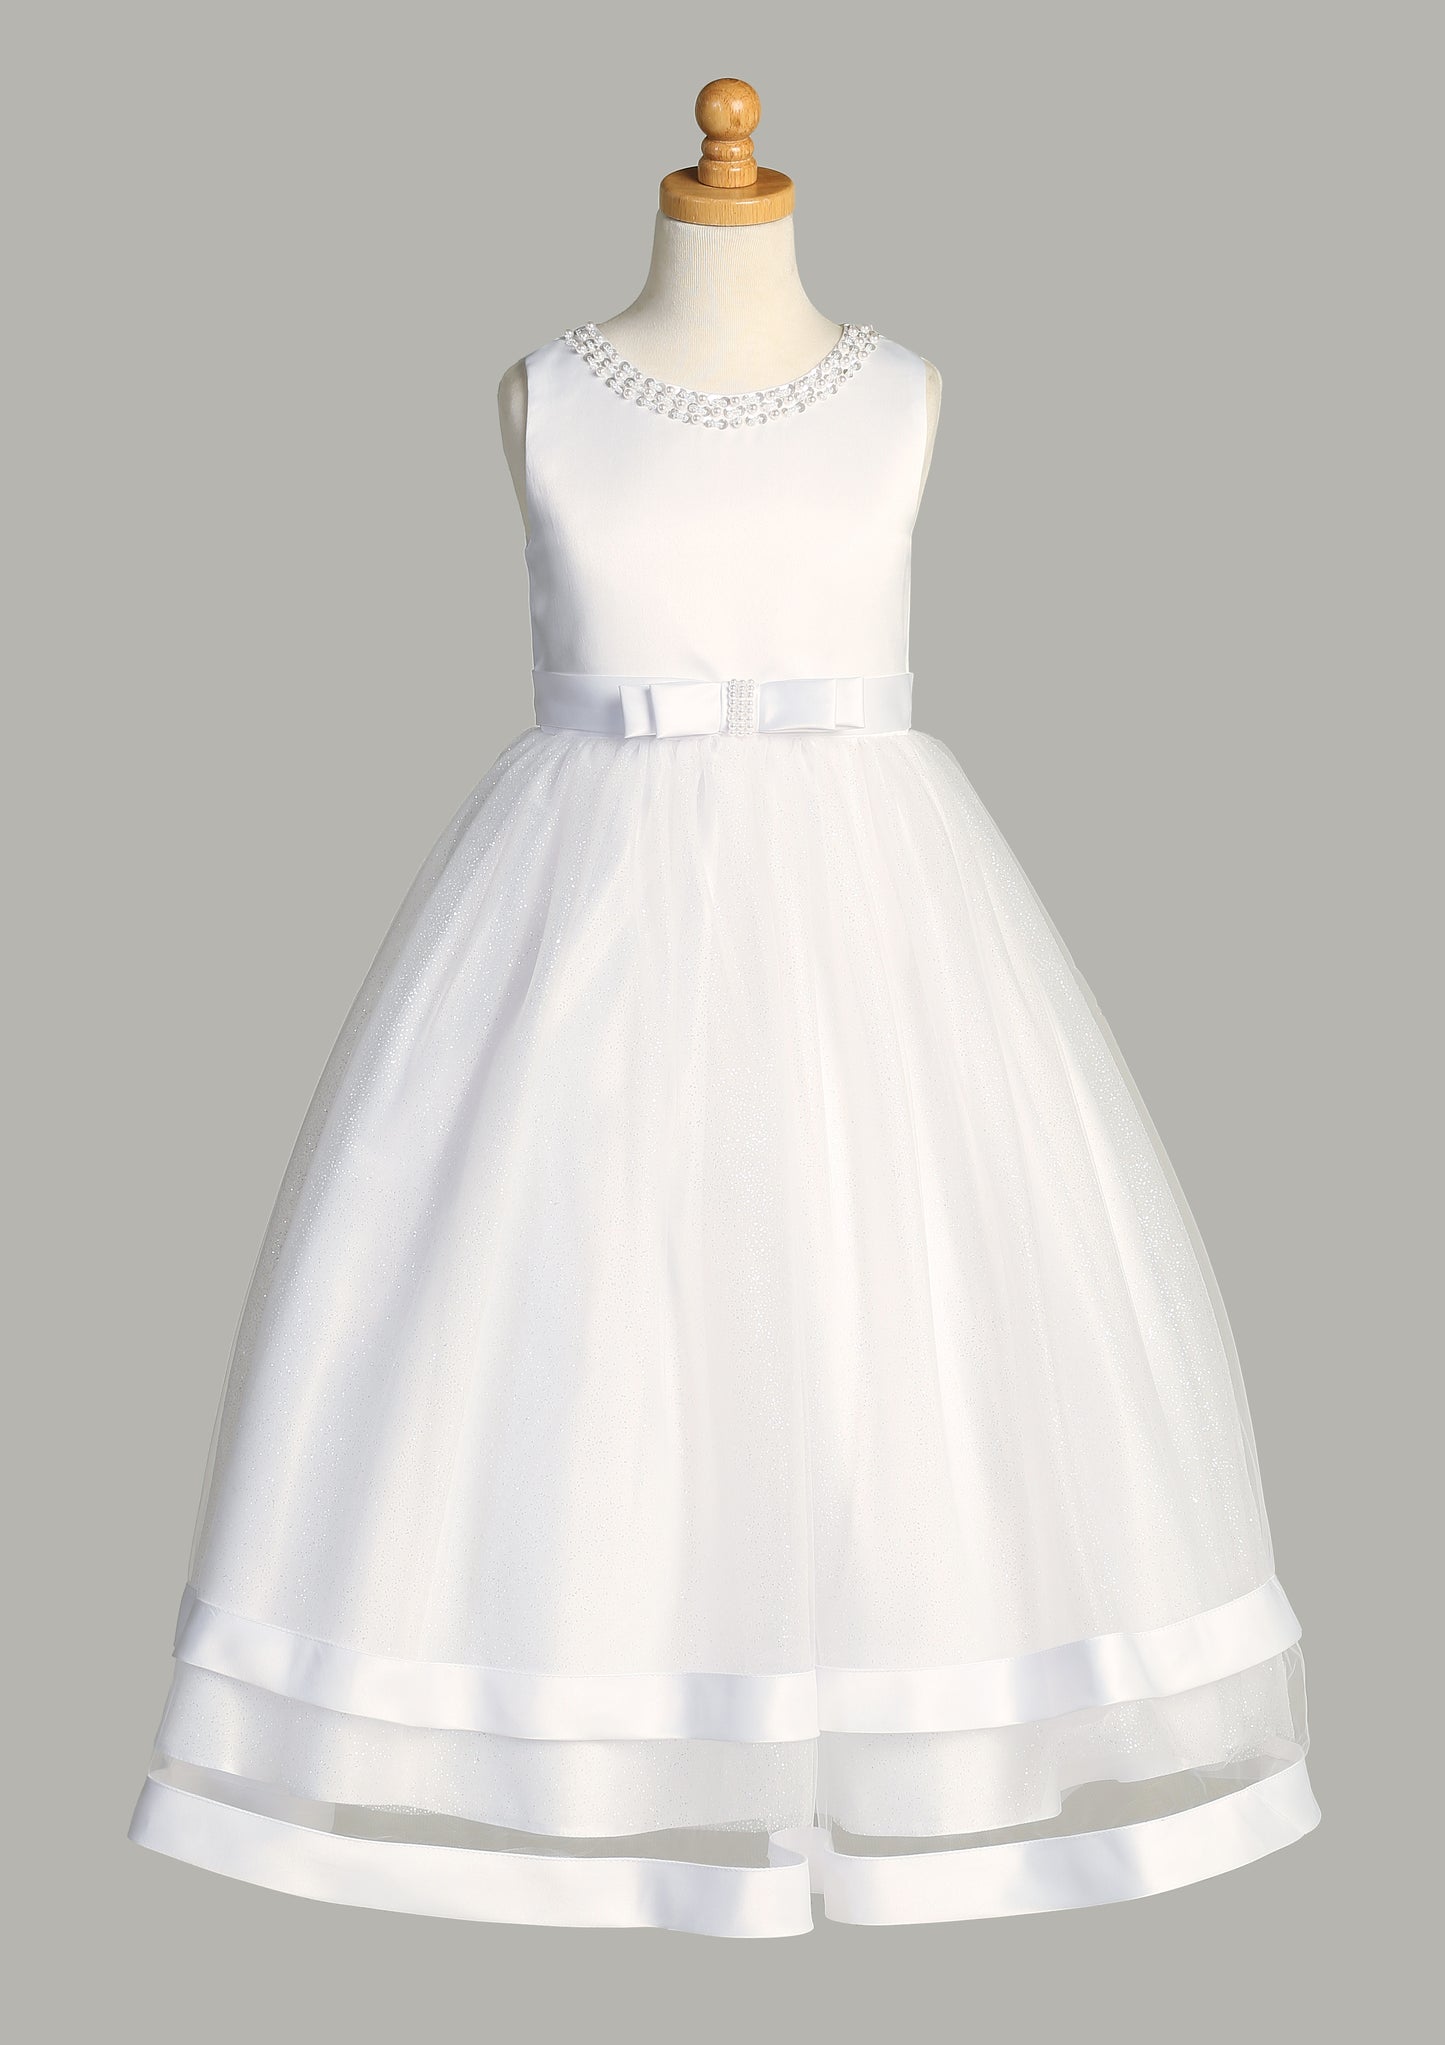 Satin and Glitter Tulle First Communion Dress with Pearl Neckline - SP717